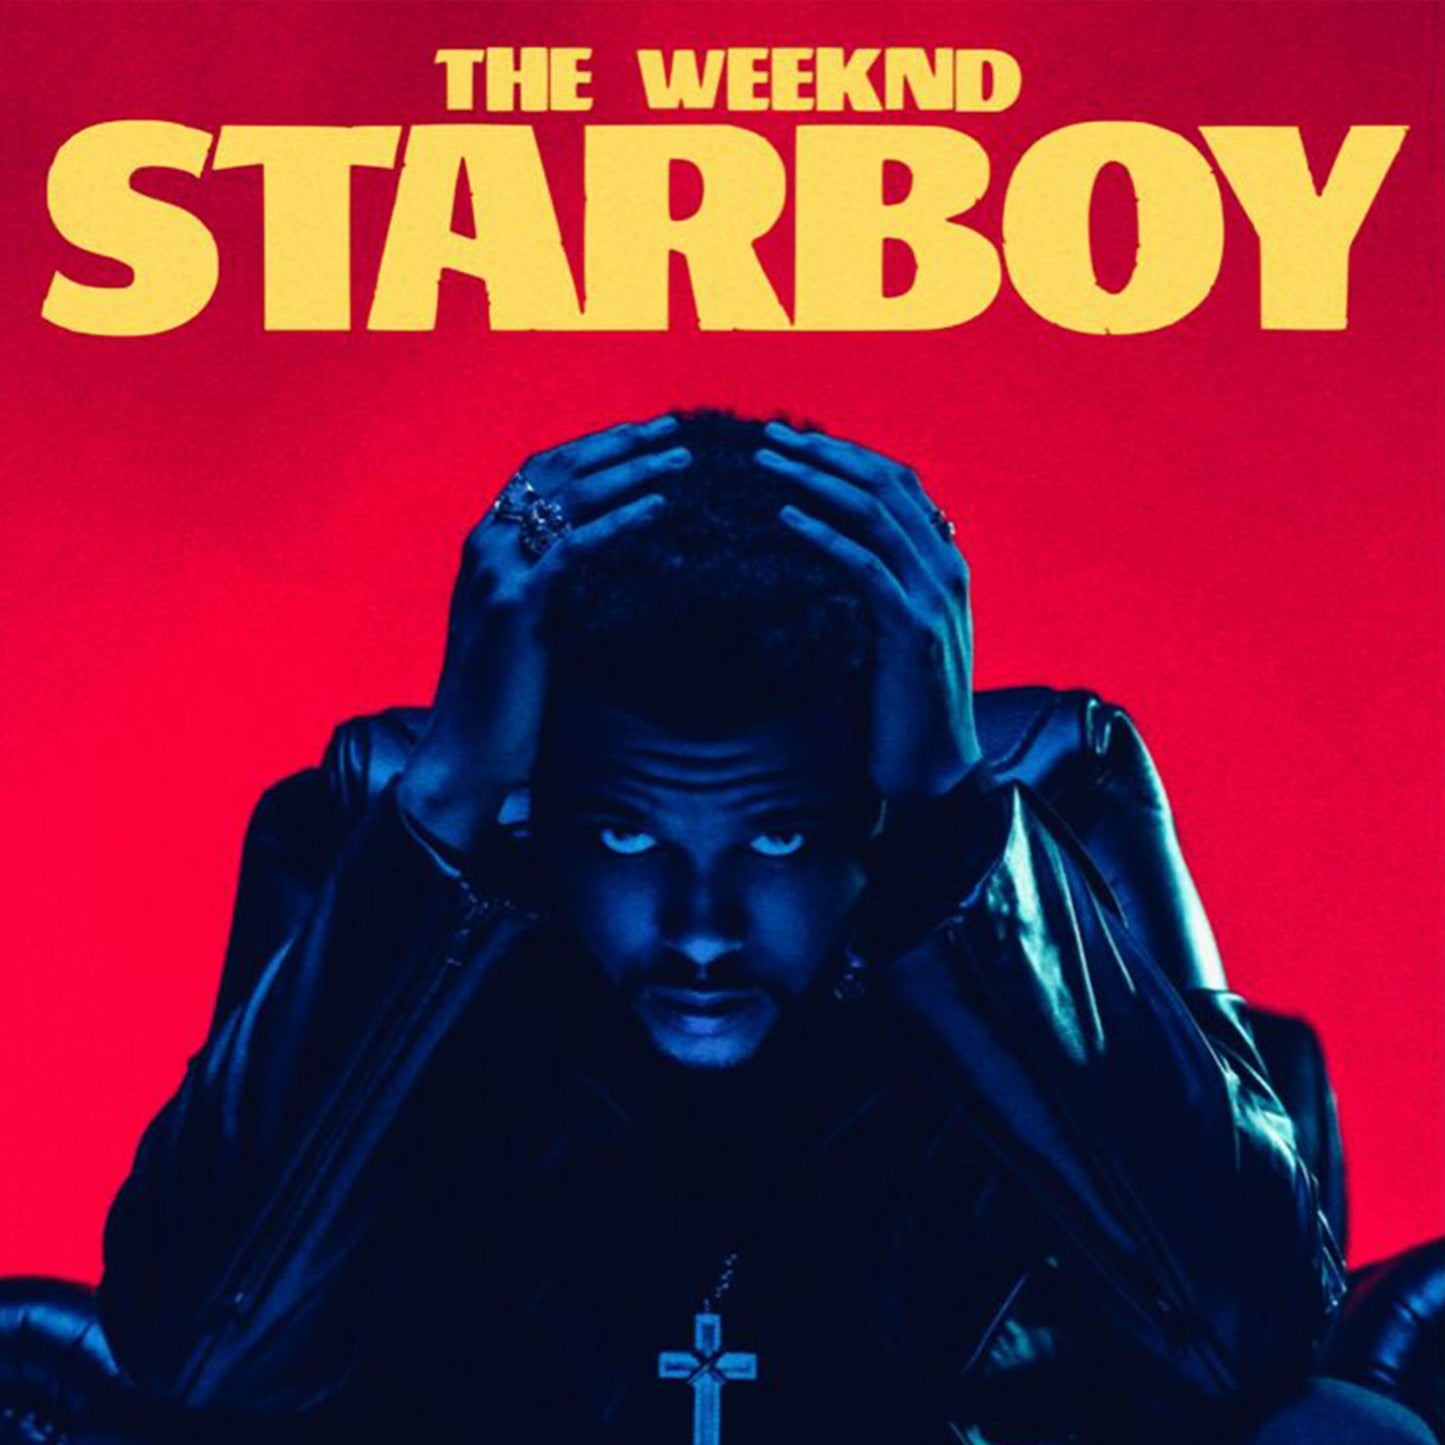 STARBOY - THE WEEKND -93 BPM - G MAJOR - MALE